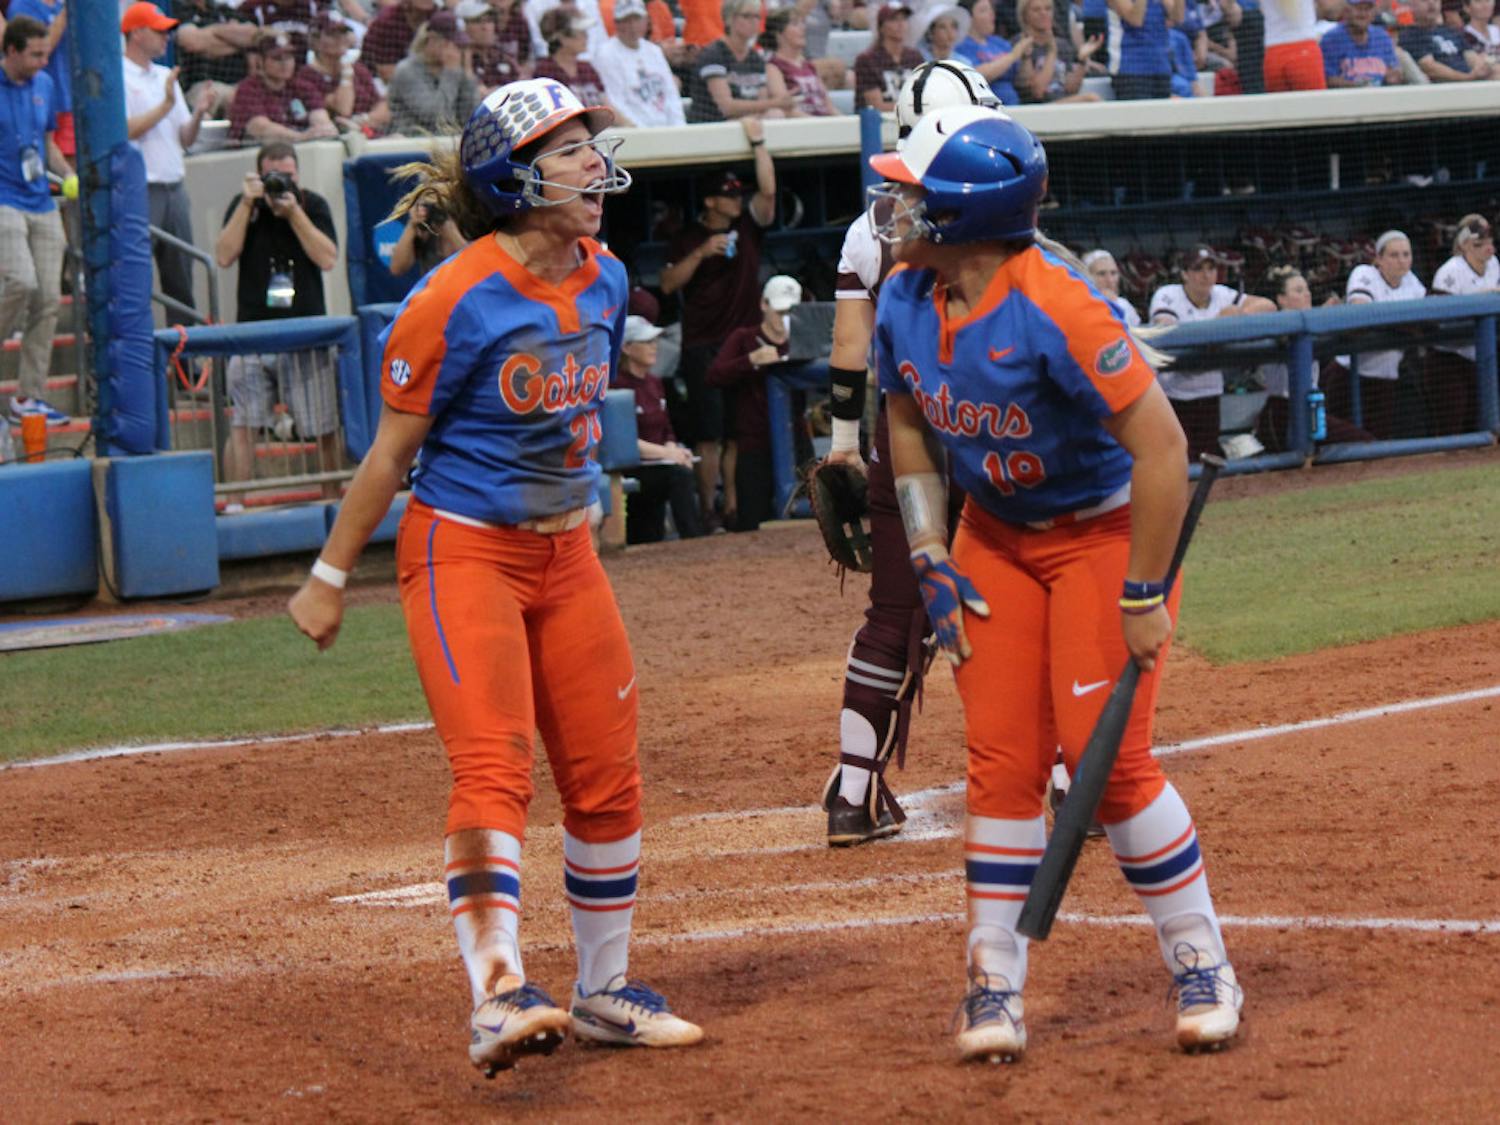 Senior third baseman Nicole DeWitt (left) and junior right fielder Amanda Lorenz (right) celebrate after scoring runs against Texas A&amp;M on Friday. They and the No. 4 Gators will face No. 9 Georgia at the Women’s College World Series in Oklahoma City.